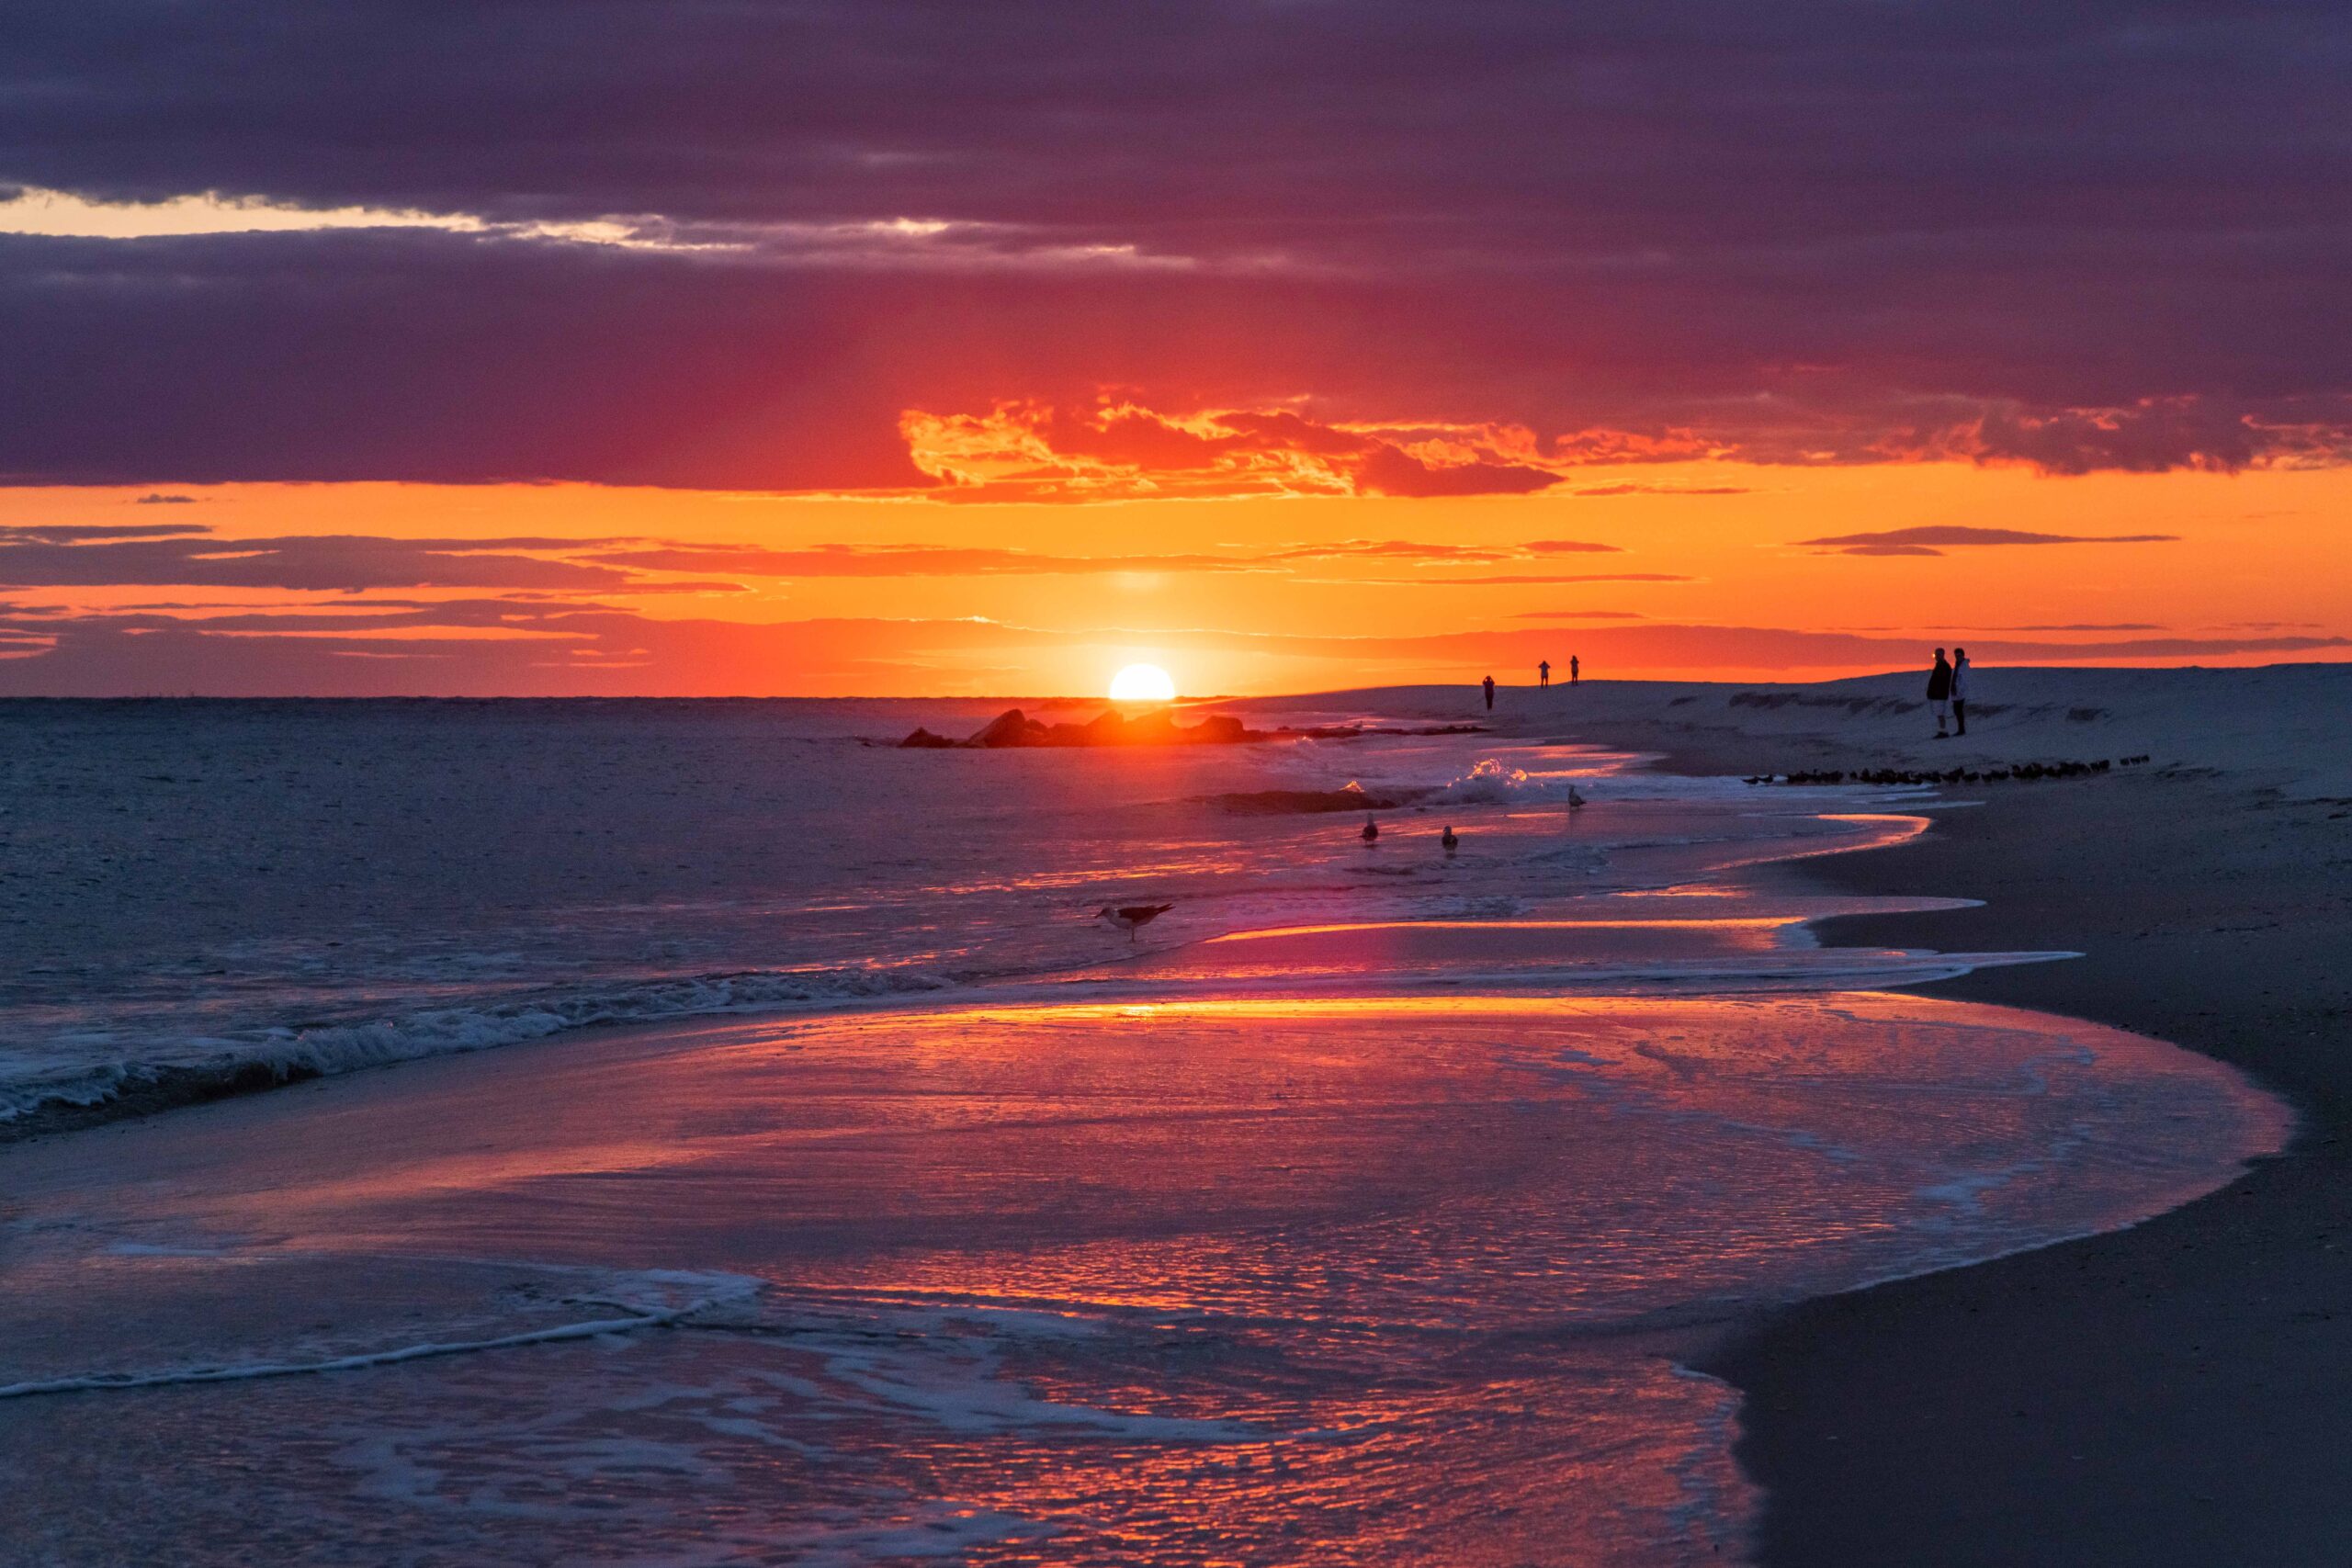 The sun setting with pink and purple clouds in the sky and orange at the horizon. The sun is reflected in the ocean and at the shoreline. People and birds are at the ocean